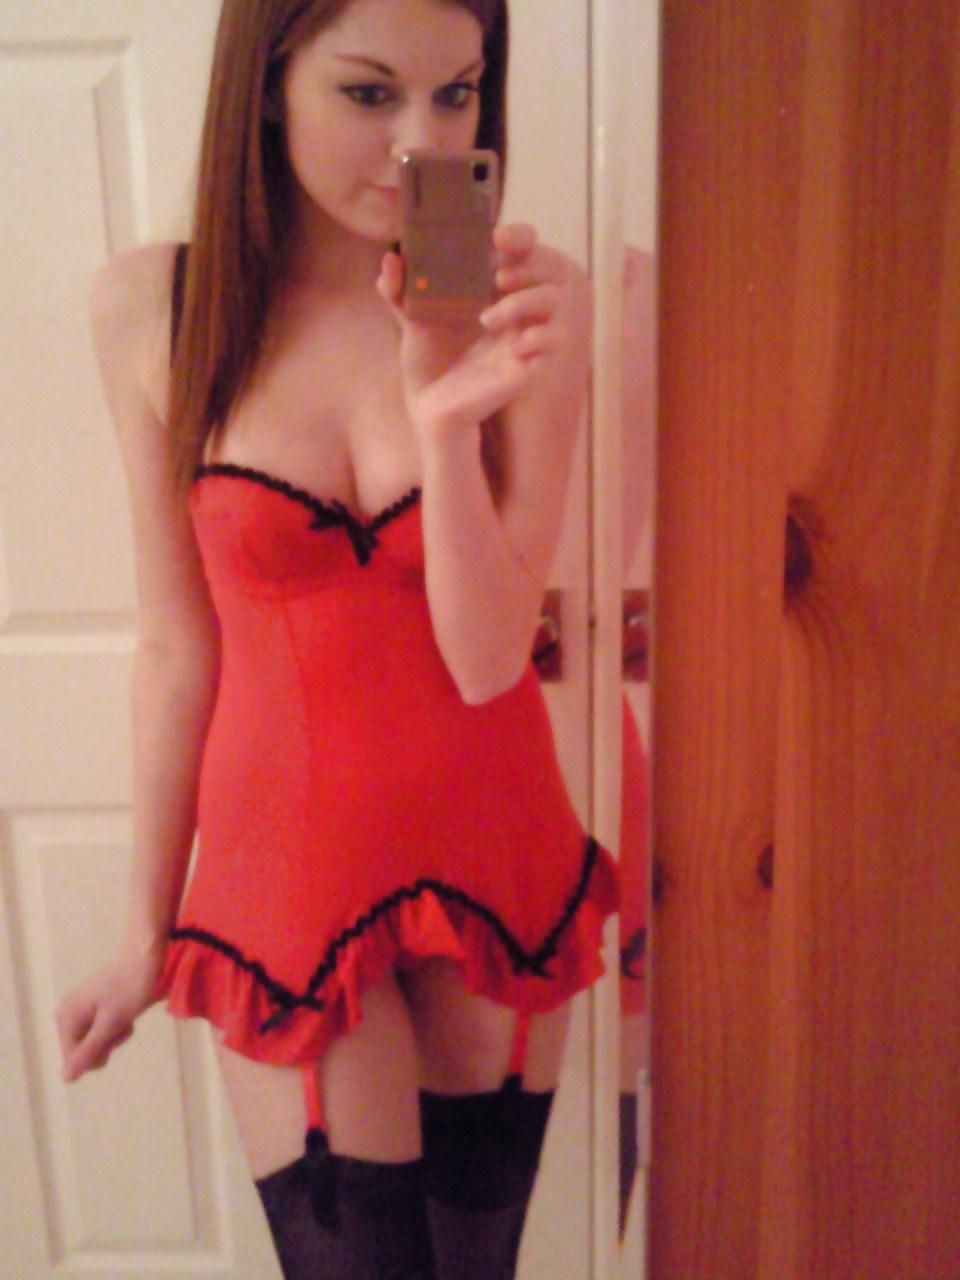 Me in black and sexy red outfit! #12981340